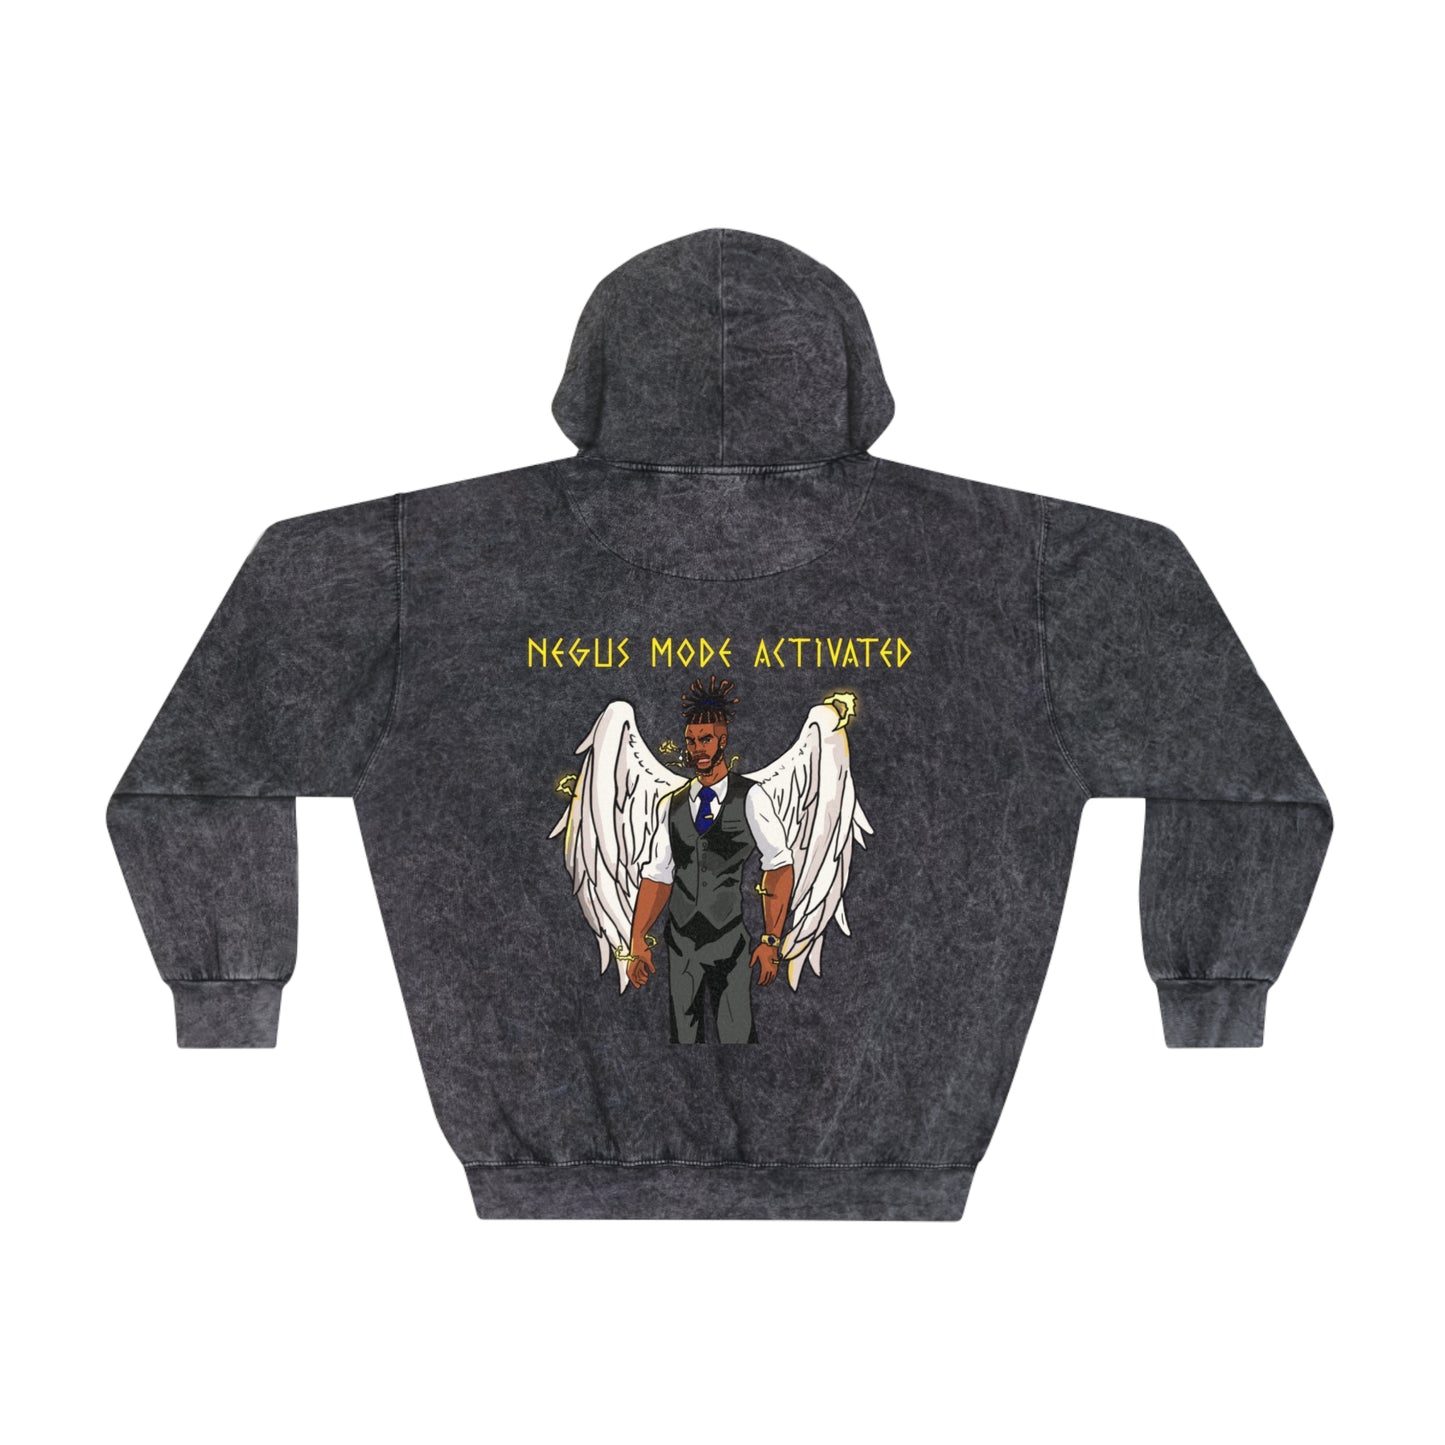 "Negus Mode Activated" Mineral Wash Hoodie